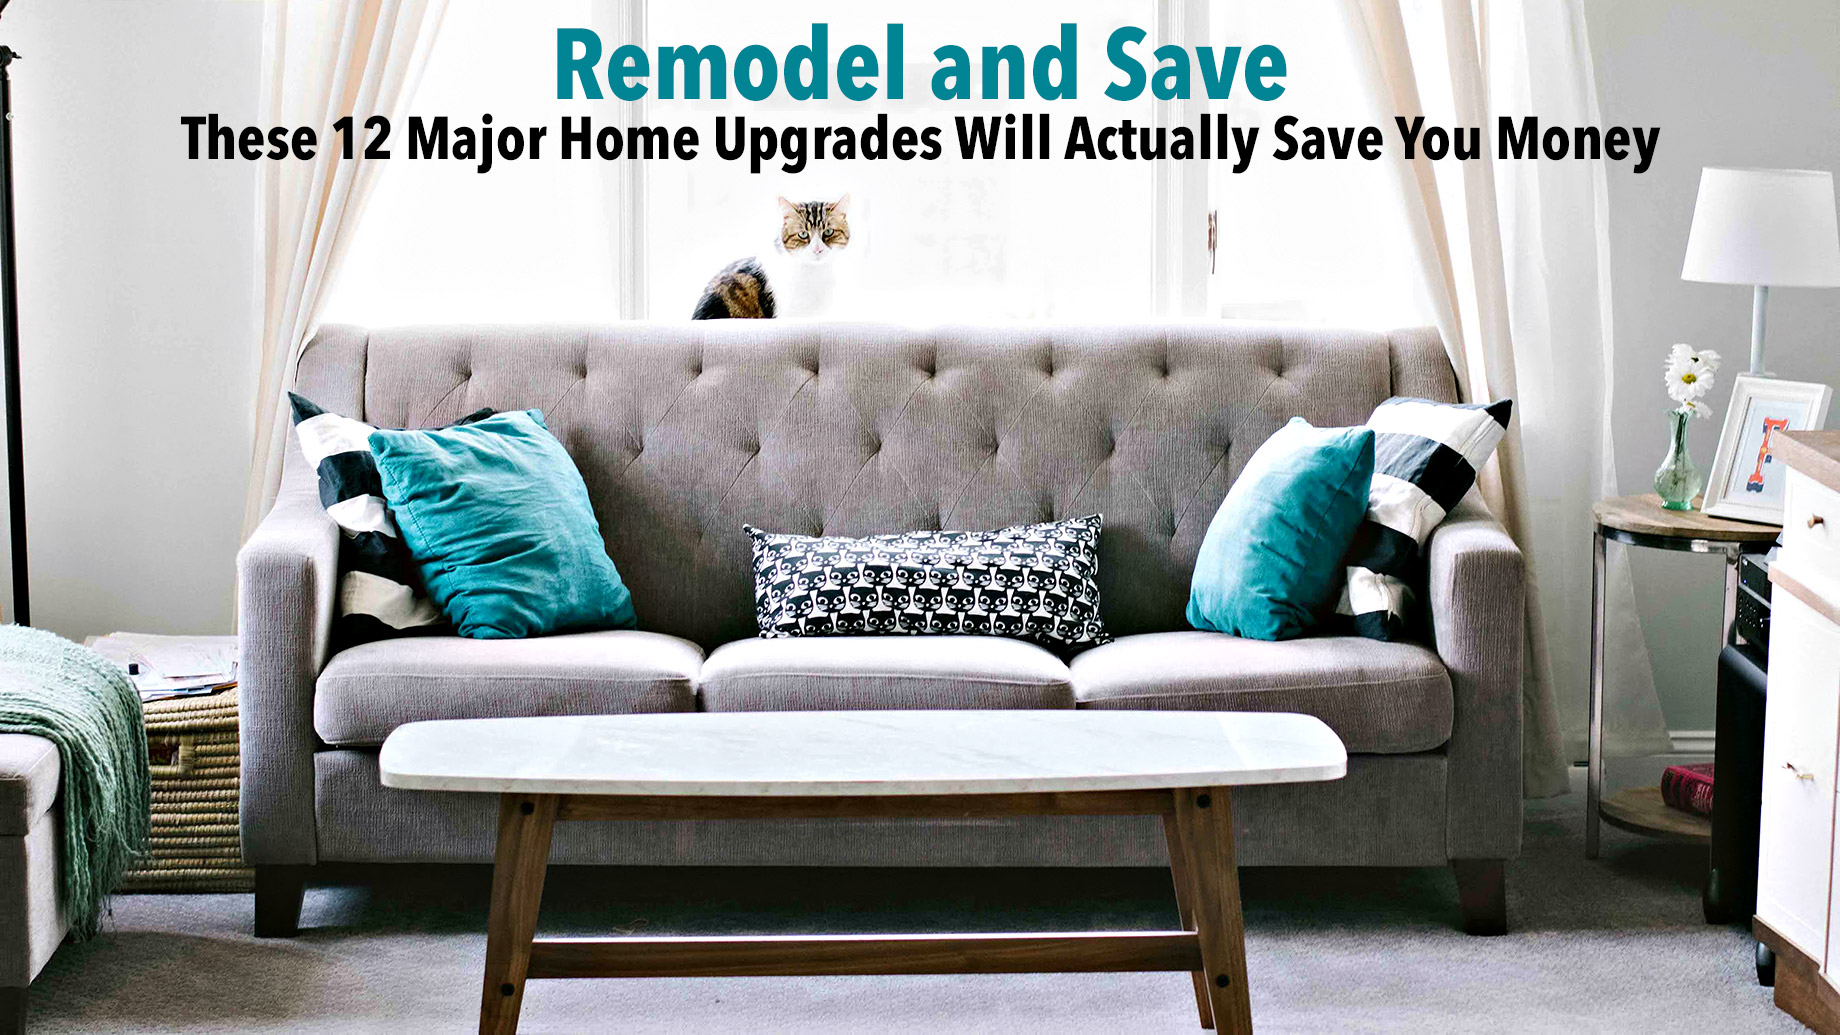 Remodel and Save - These 12 Major Home Upgrades Will Actually Save You Money